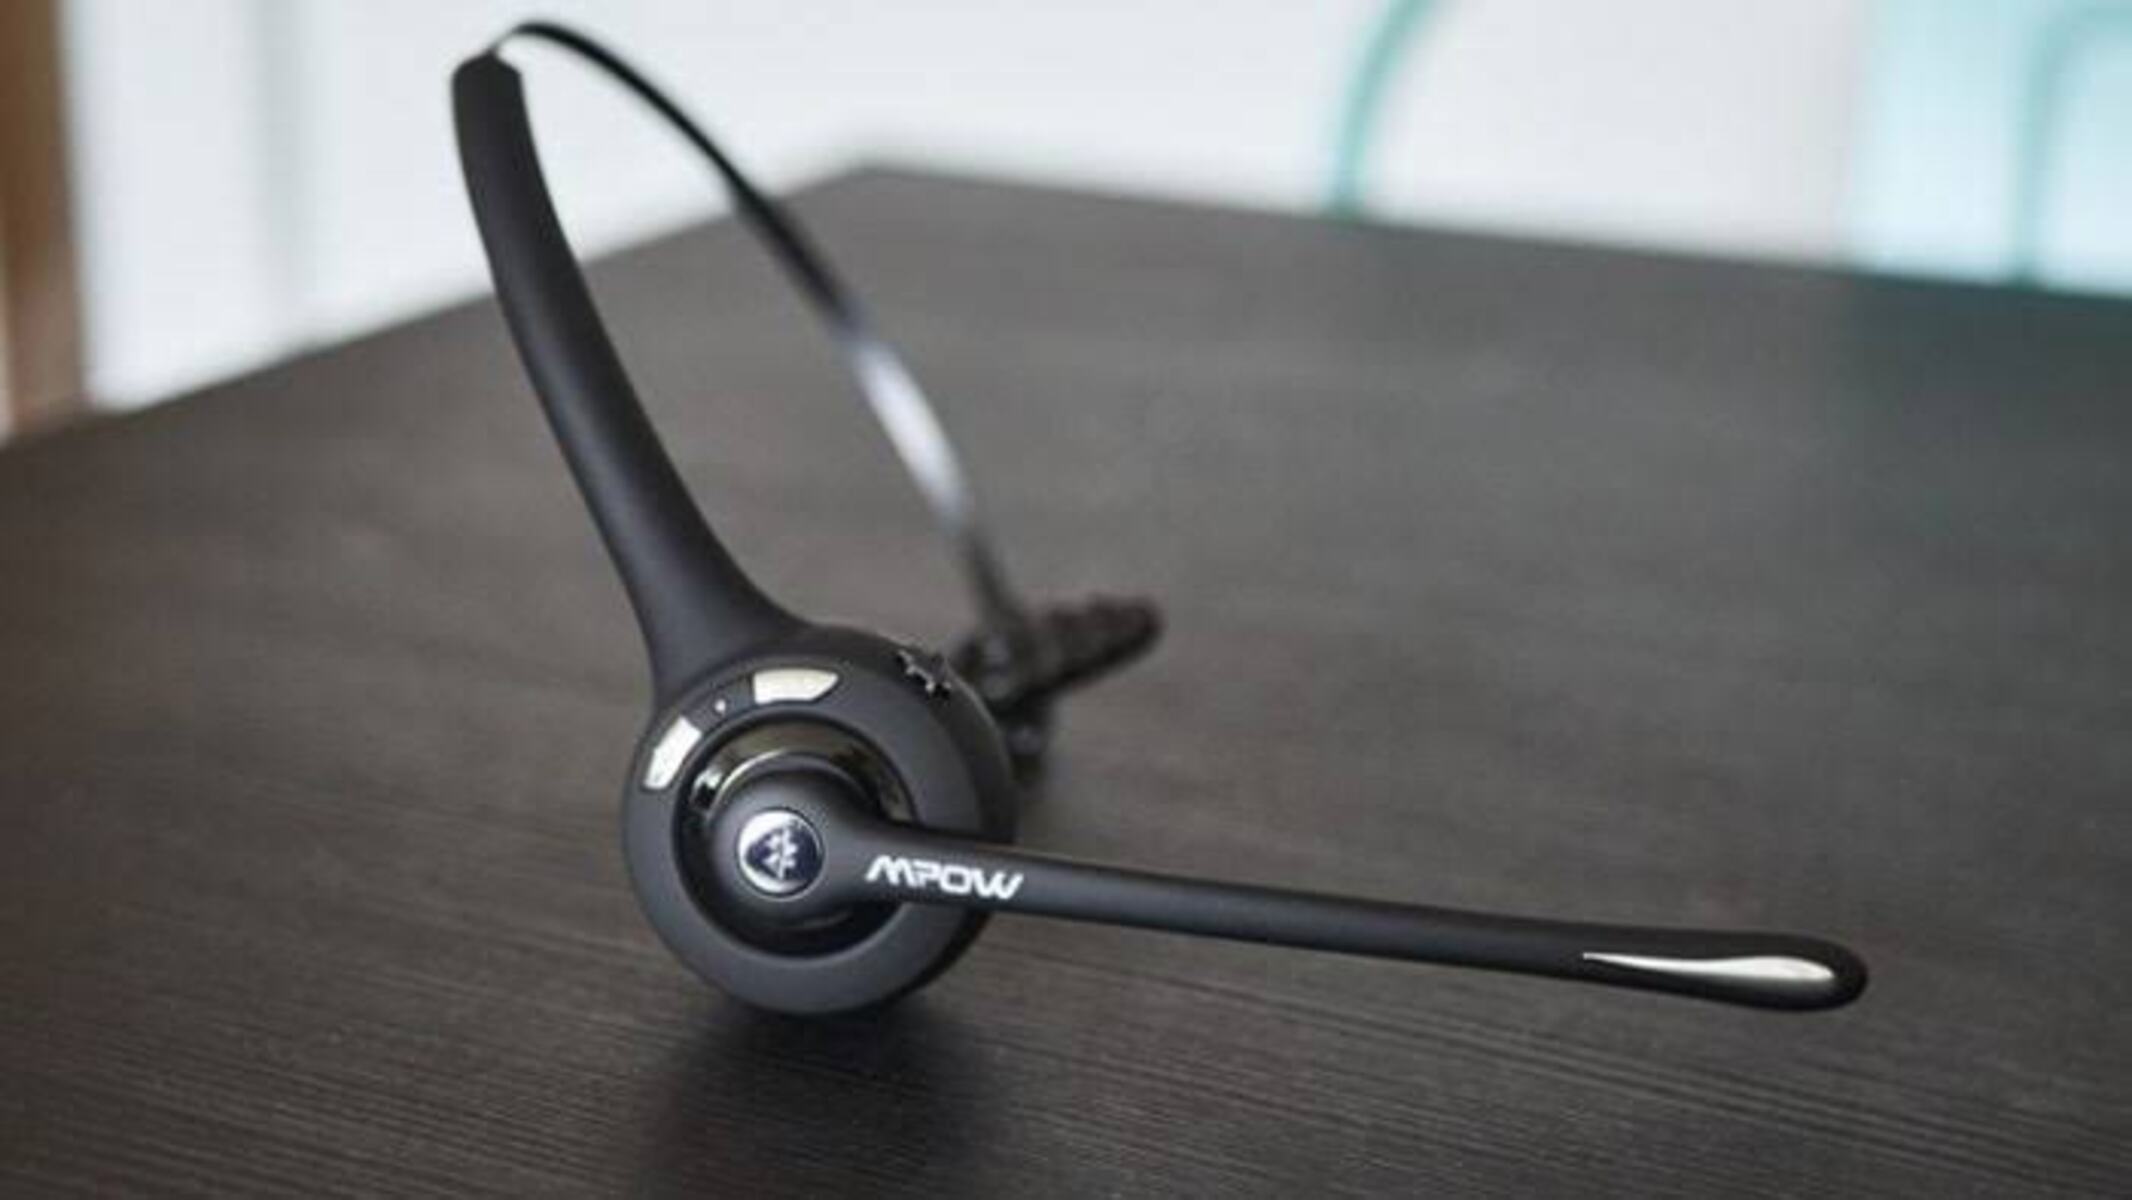 Mpow Pro Trucker Bluetooth Headset Review: Calls On The Go, For Less